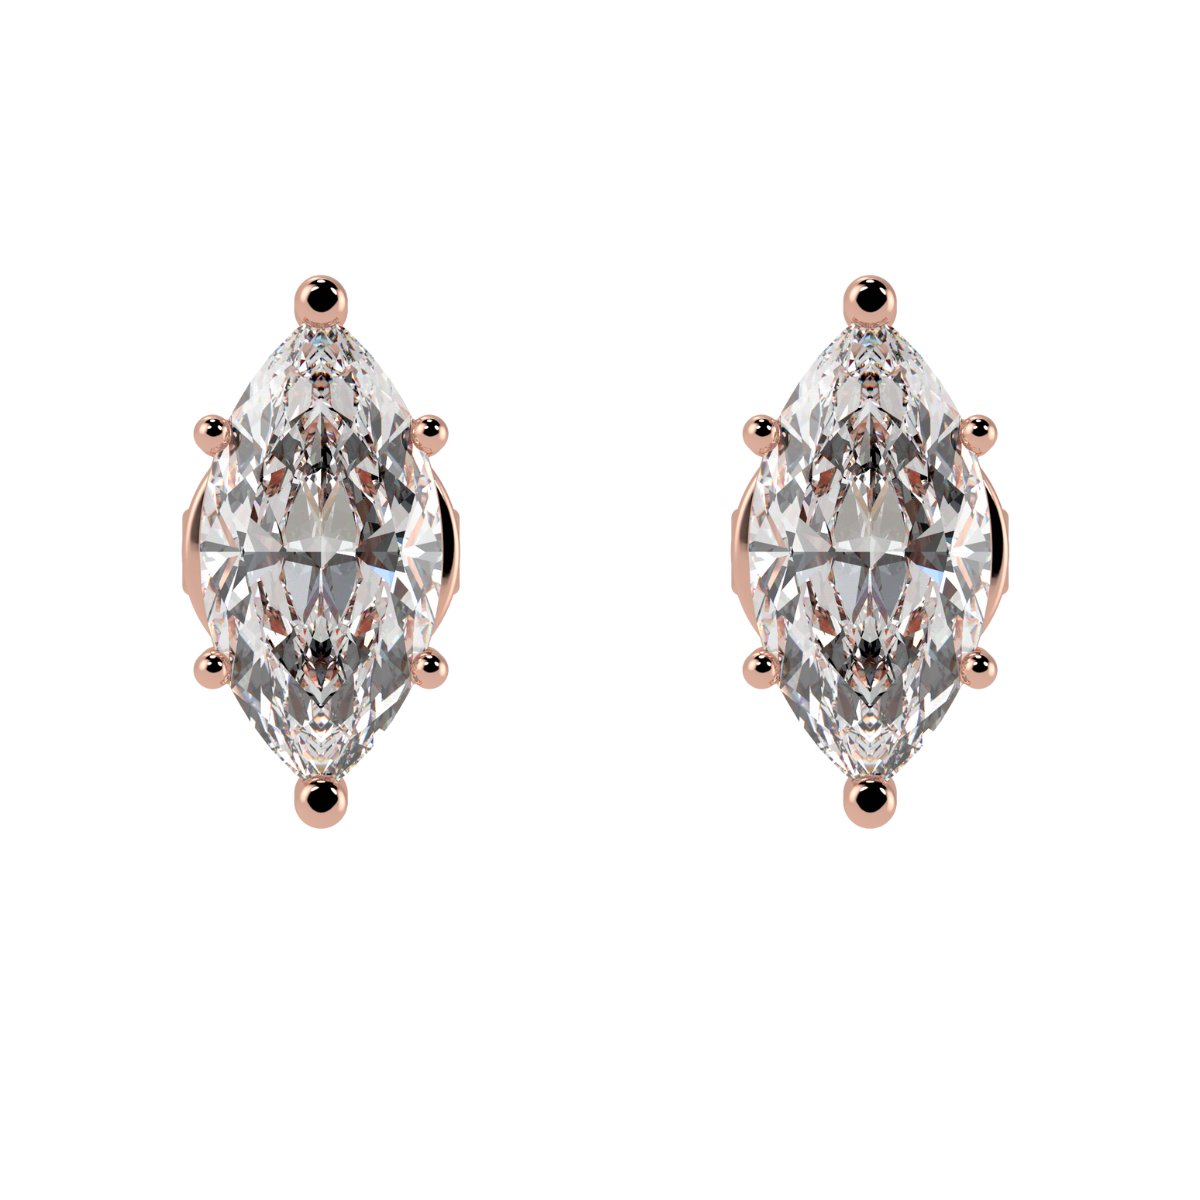 Marquise Solitaire Stud Earrings